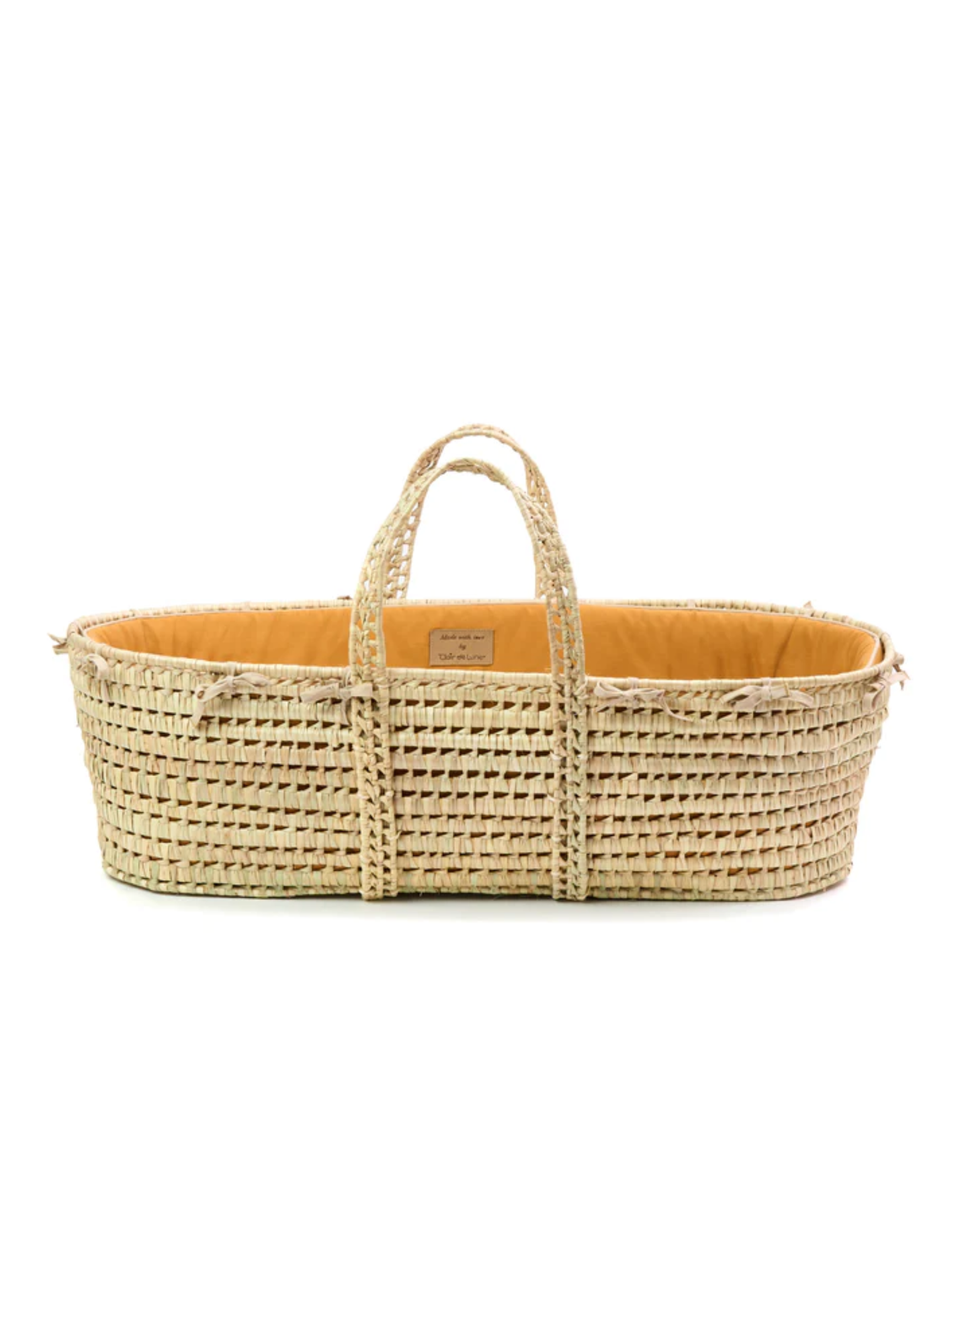 Clair de Lune Savannah Palm Moses Basket with Rocking Stand